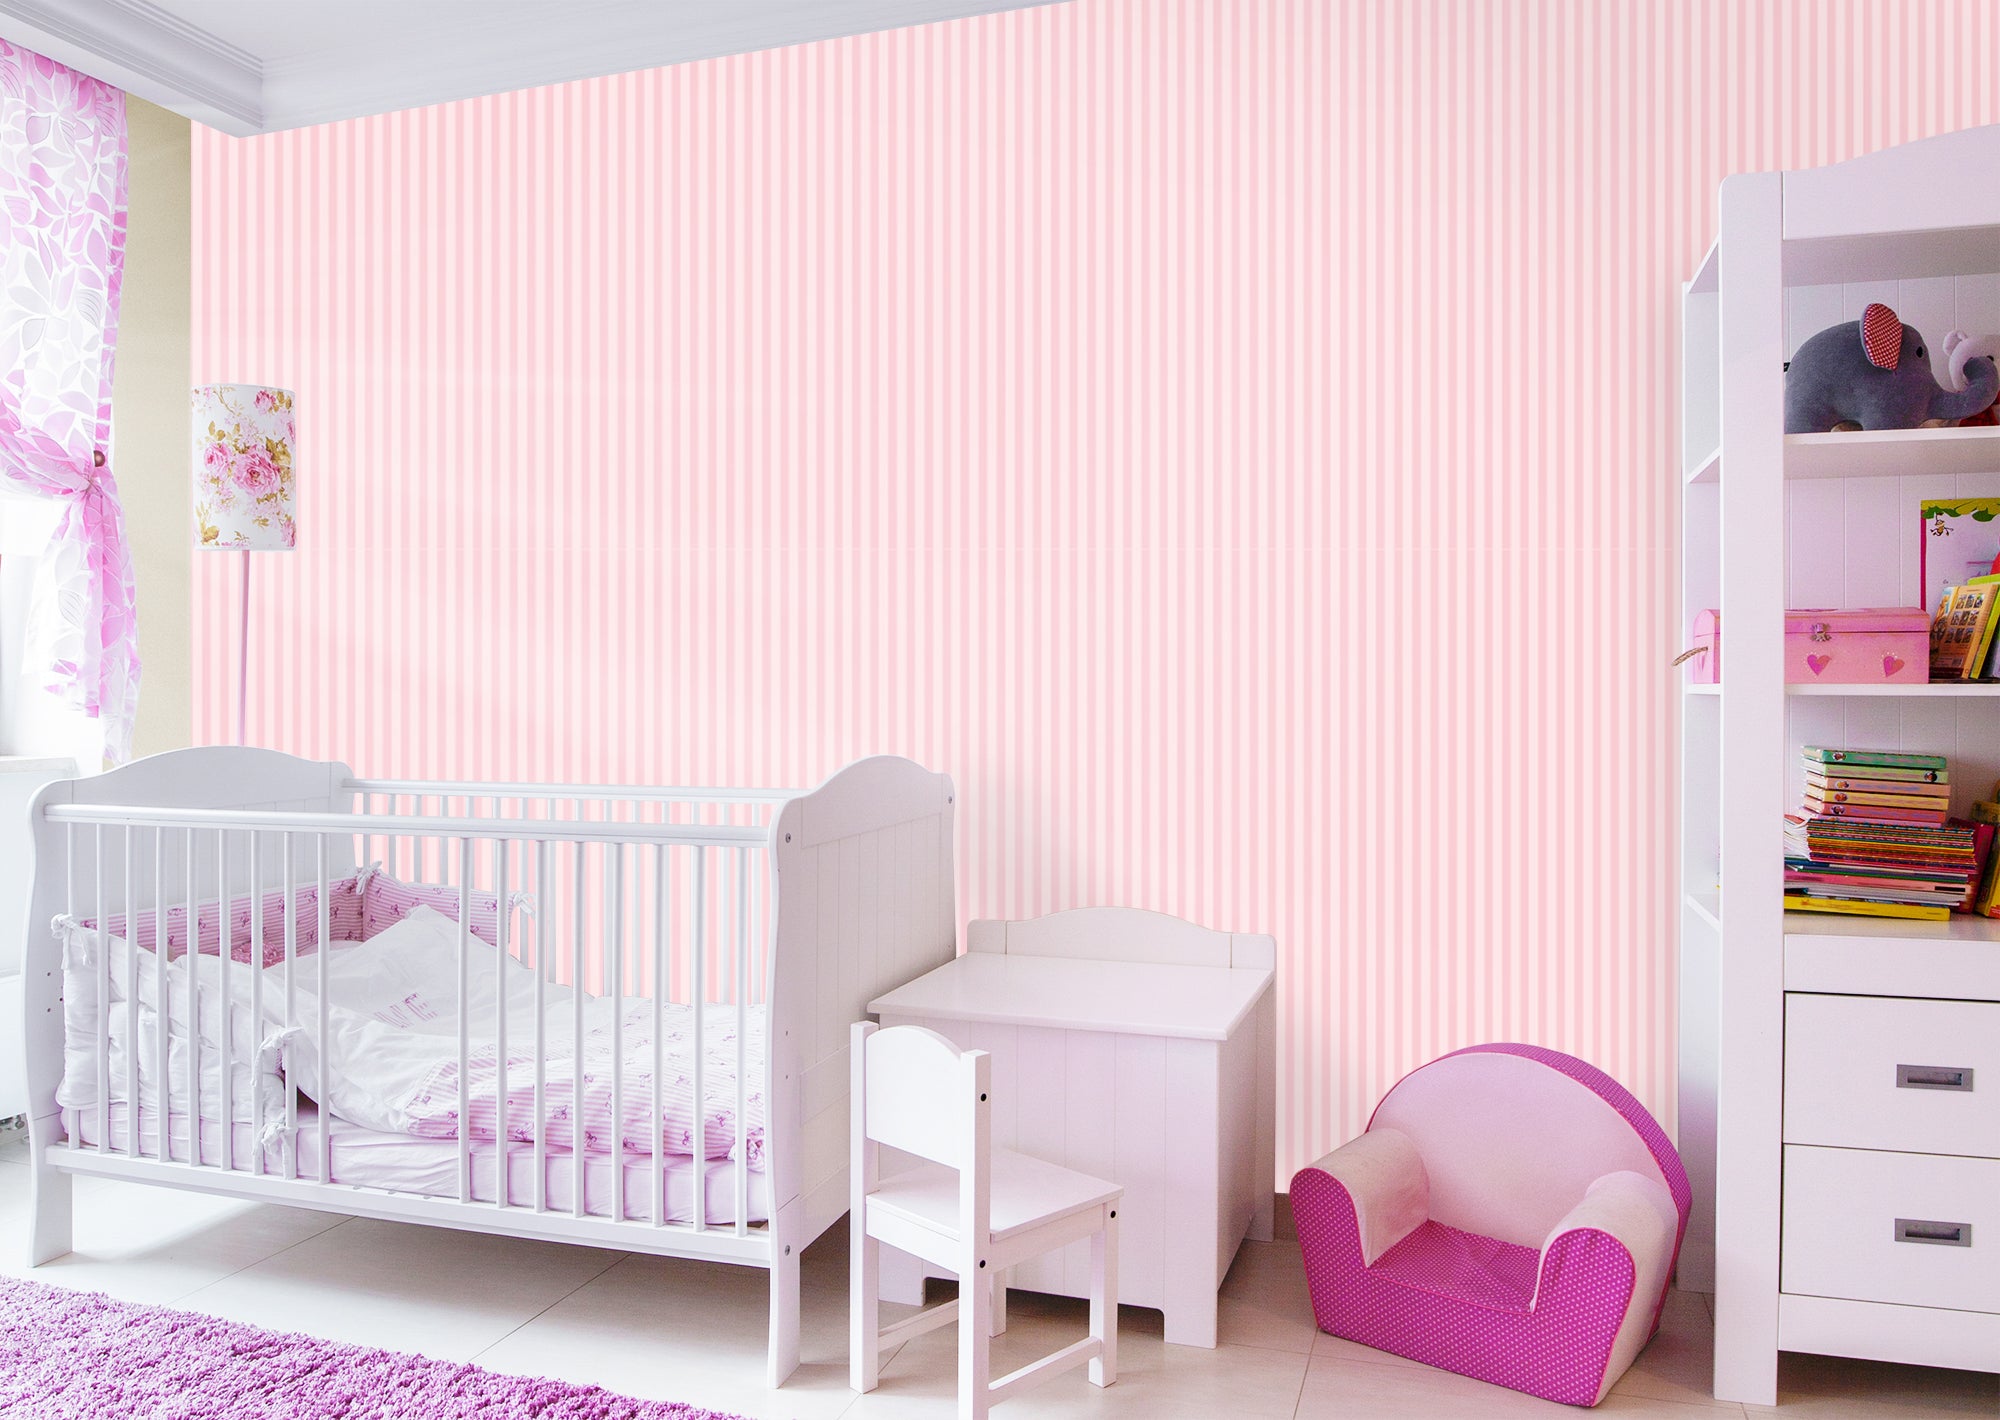 Dont Pink Twice About It - Removable Peel & Stick Wallpaper 24" x 48" (8 sf) by Fathead